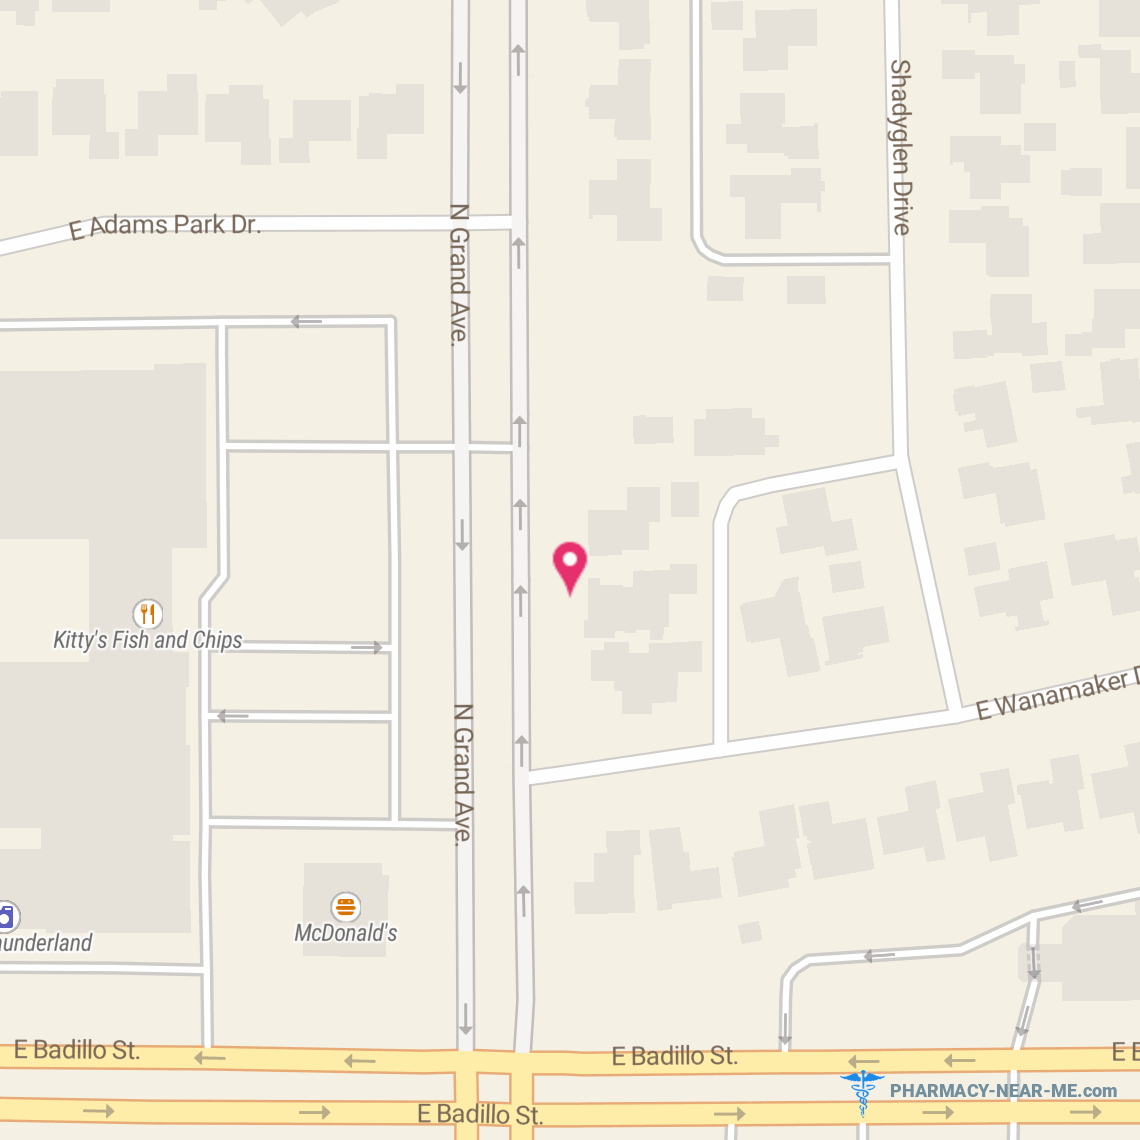 WALGREENS #06972 - Pharmacy Hours, Phone, Reviews & Information: 150 S Grand Ave, Covina, California 91724, United States